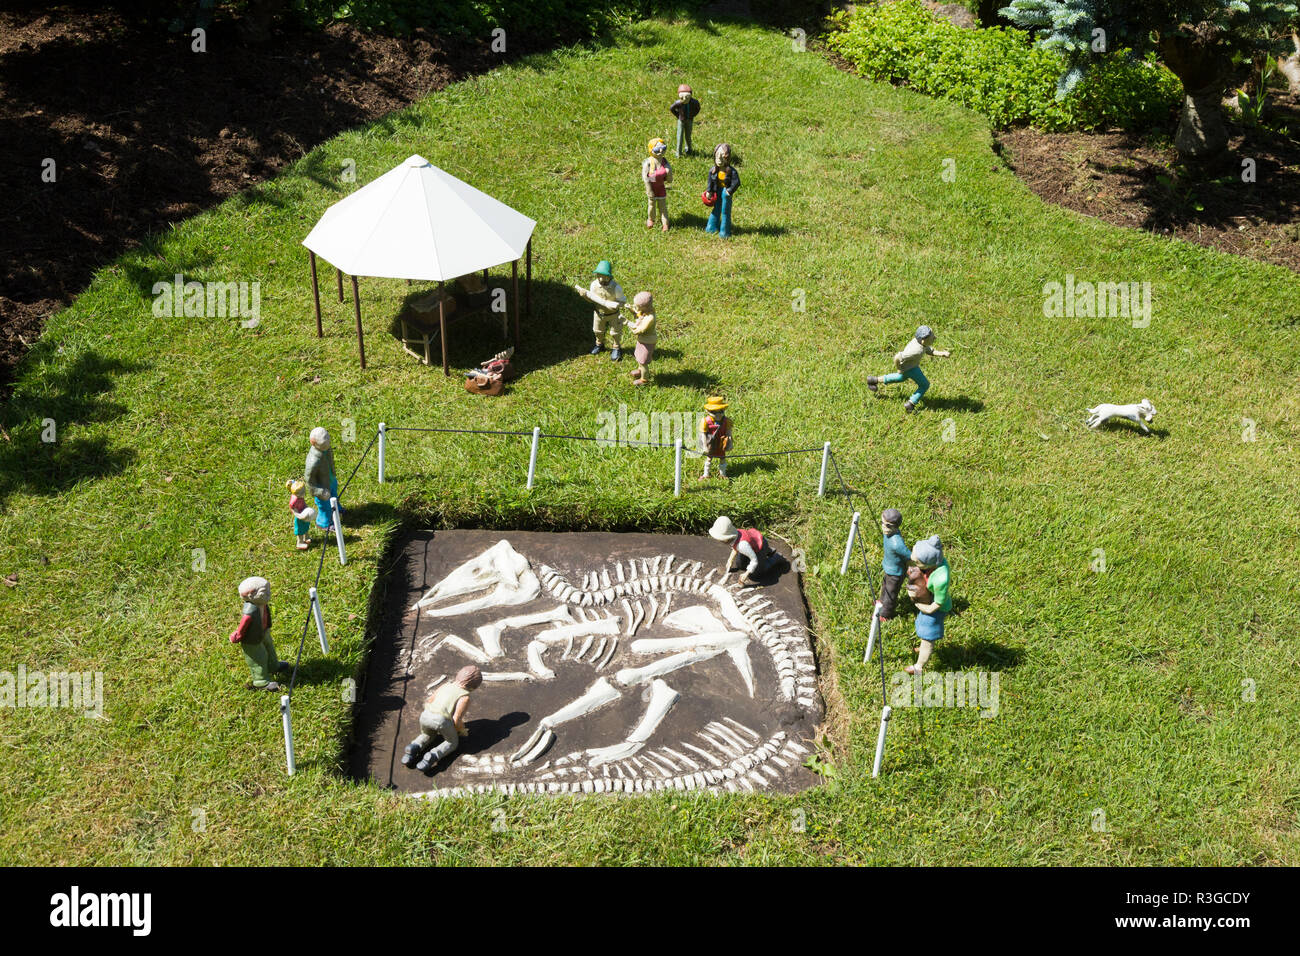 Miniature recreation / creation of an archaeological dig for a dinosaur skeleton at site inside the Model Village. Godshill, Ventnor, Isle of Wight UK Stock Photo